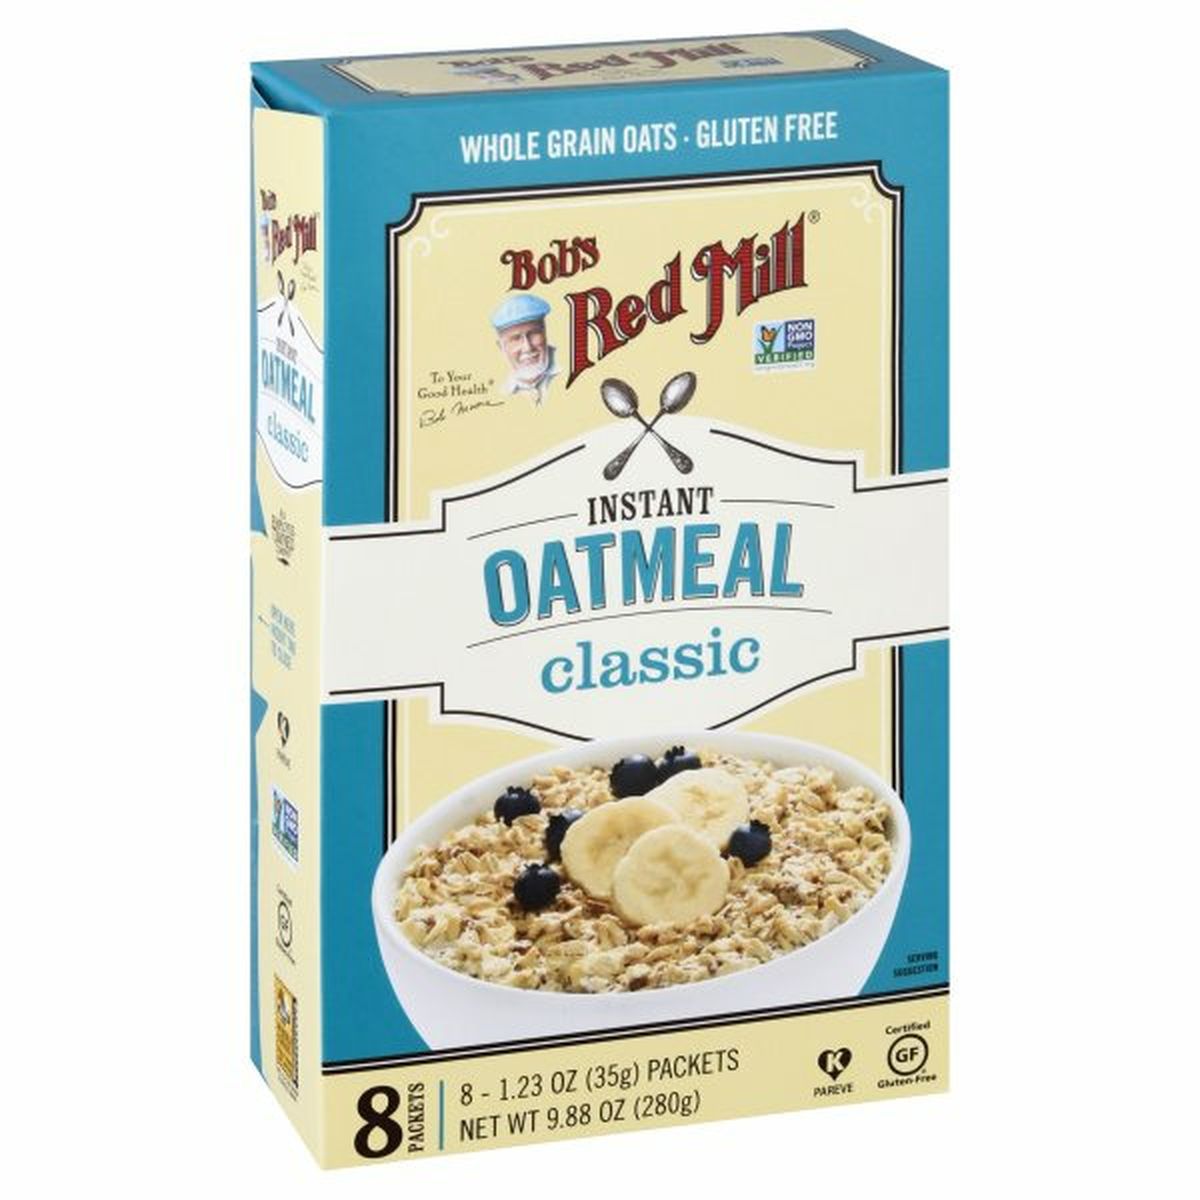 Calories in Bob's Red Mill Oatmeal, Instant, Classic, 8 Pack